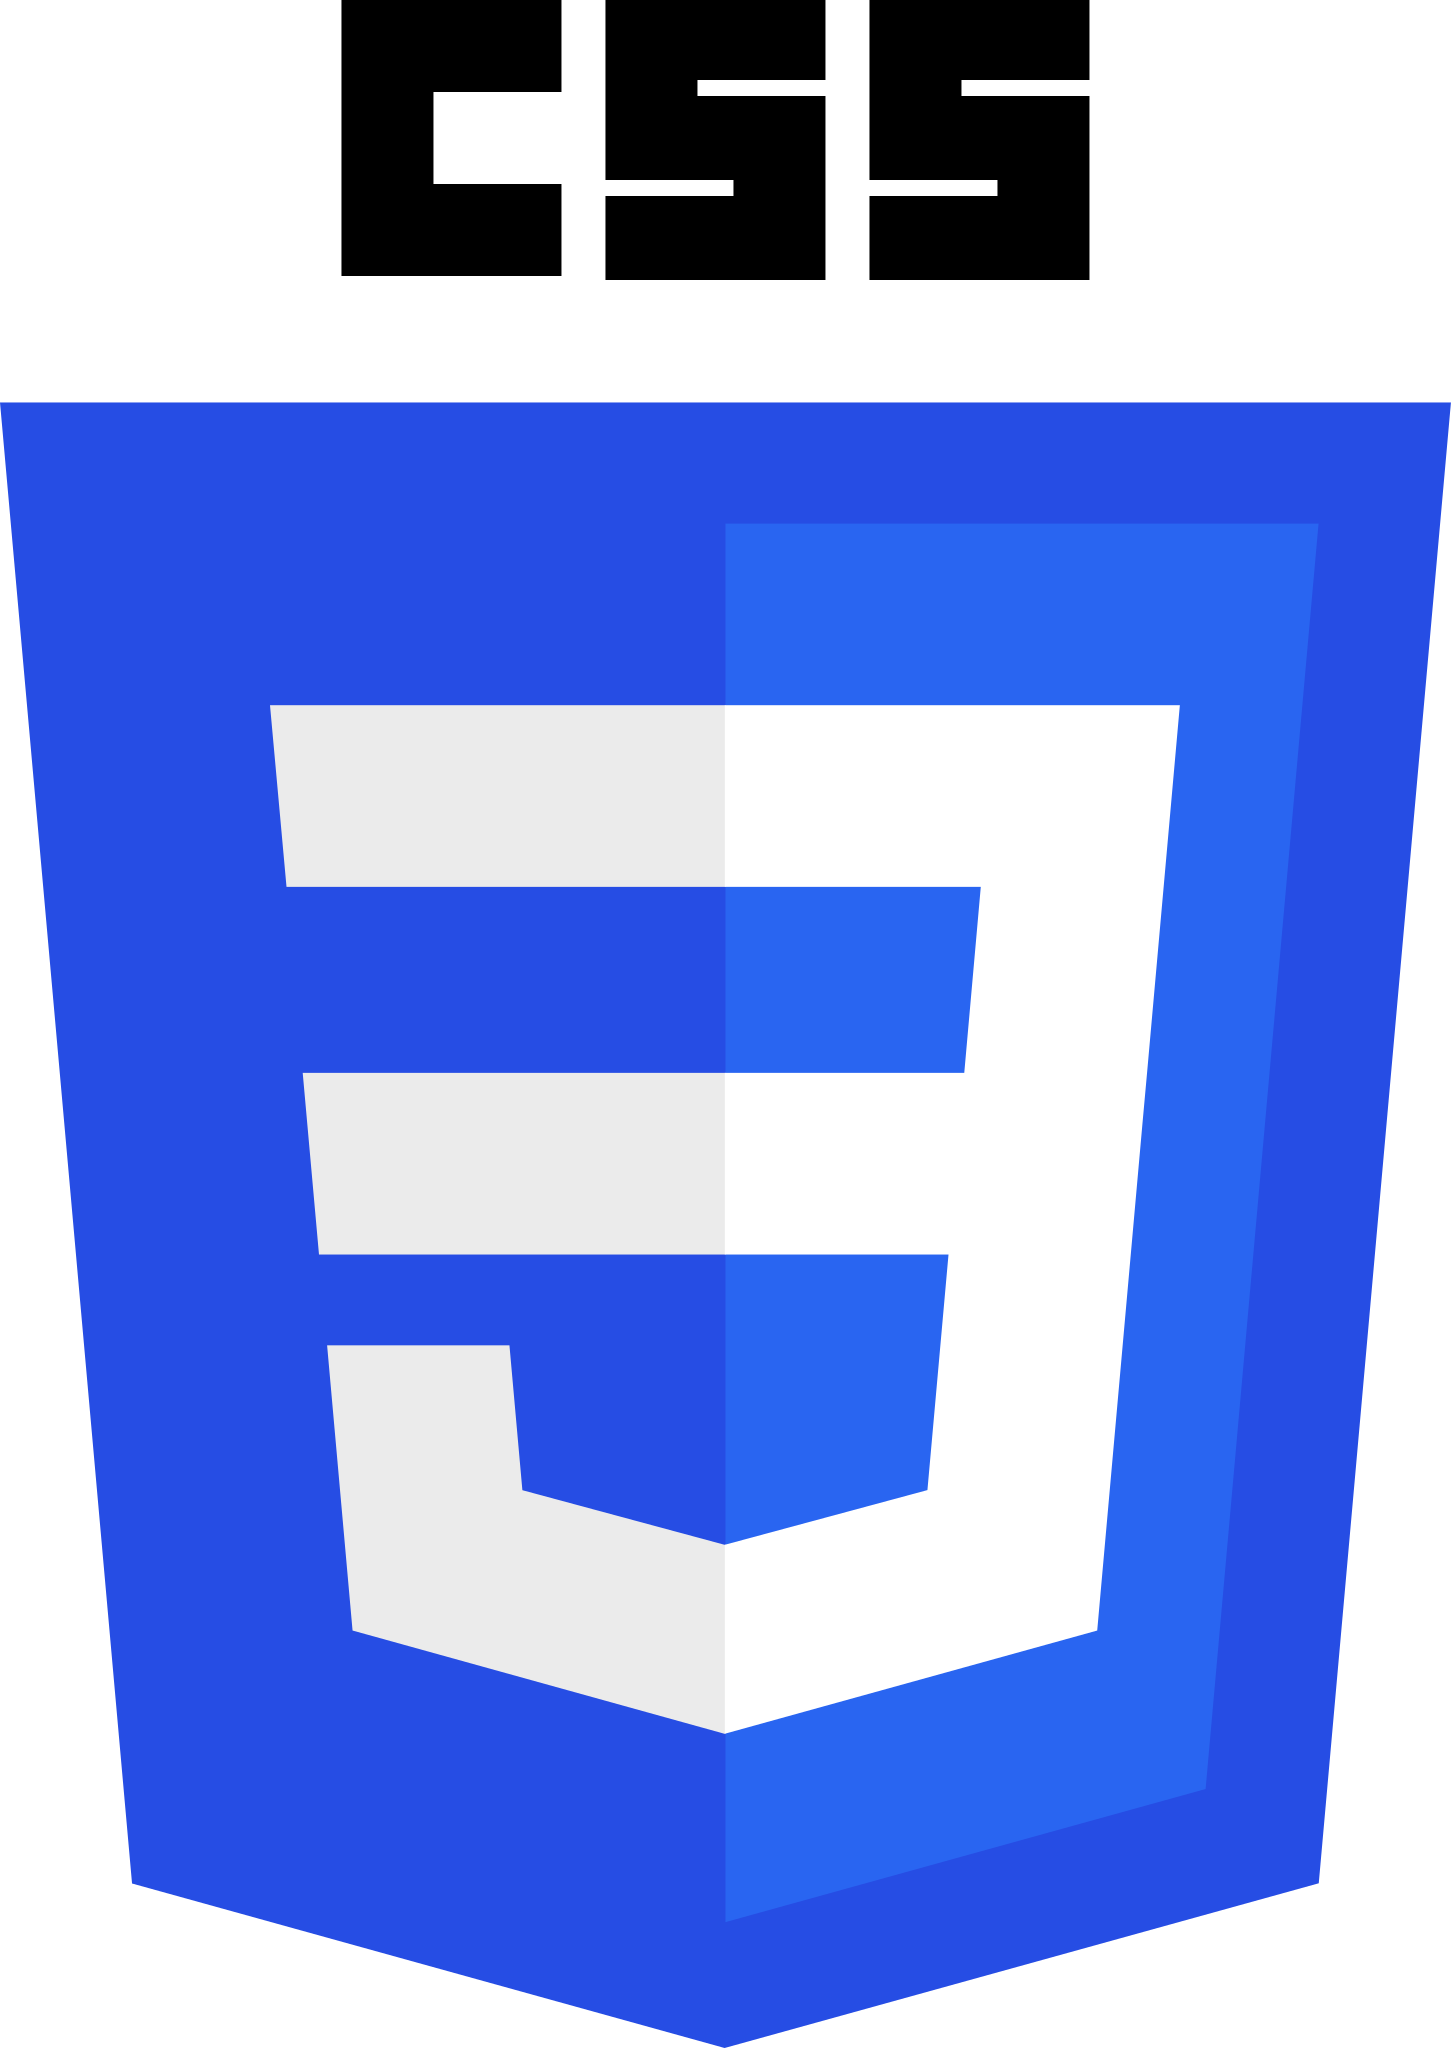 File:CSS3 logo and wordmark.svg - Wikimedia Commons